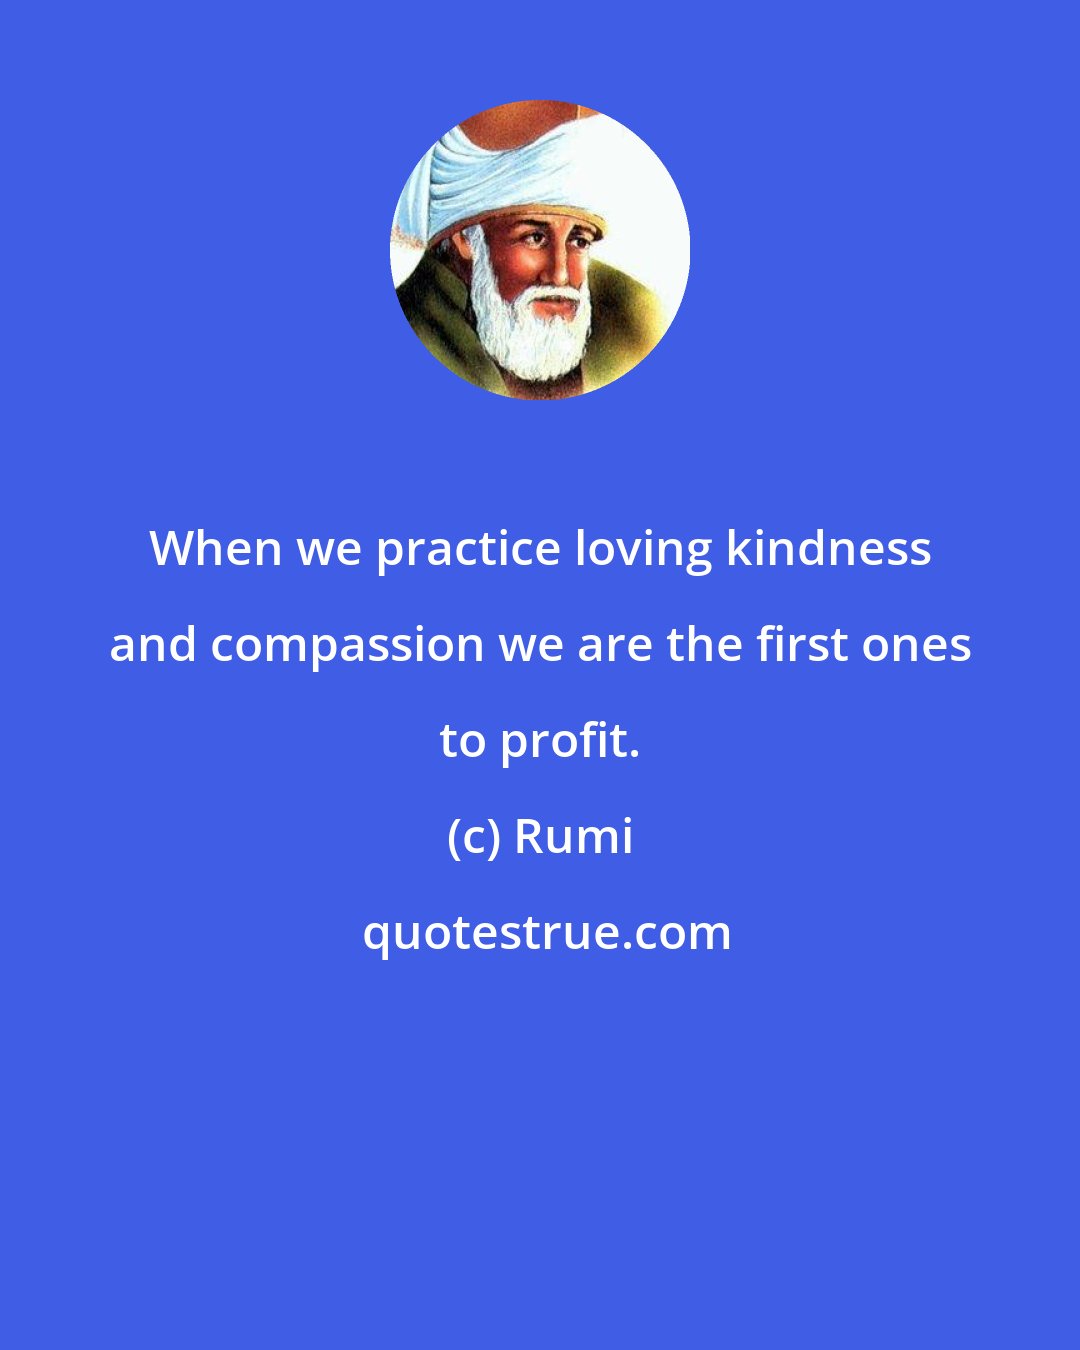 Rumi: When we practice loving kindness and compassion we are the first ones to profit.